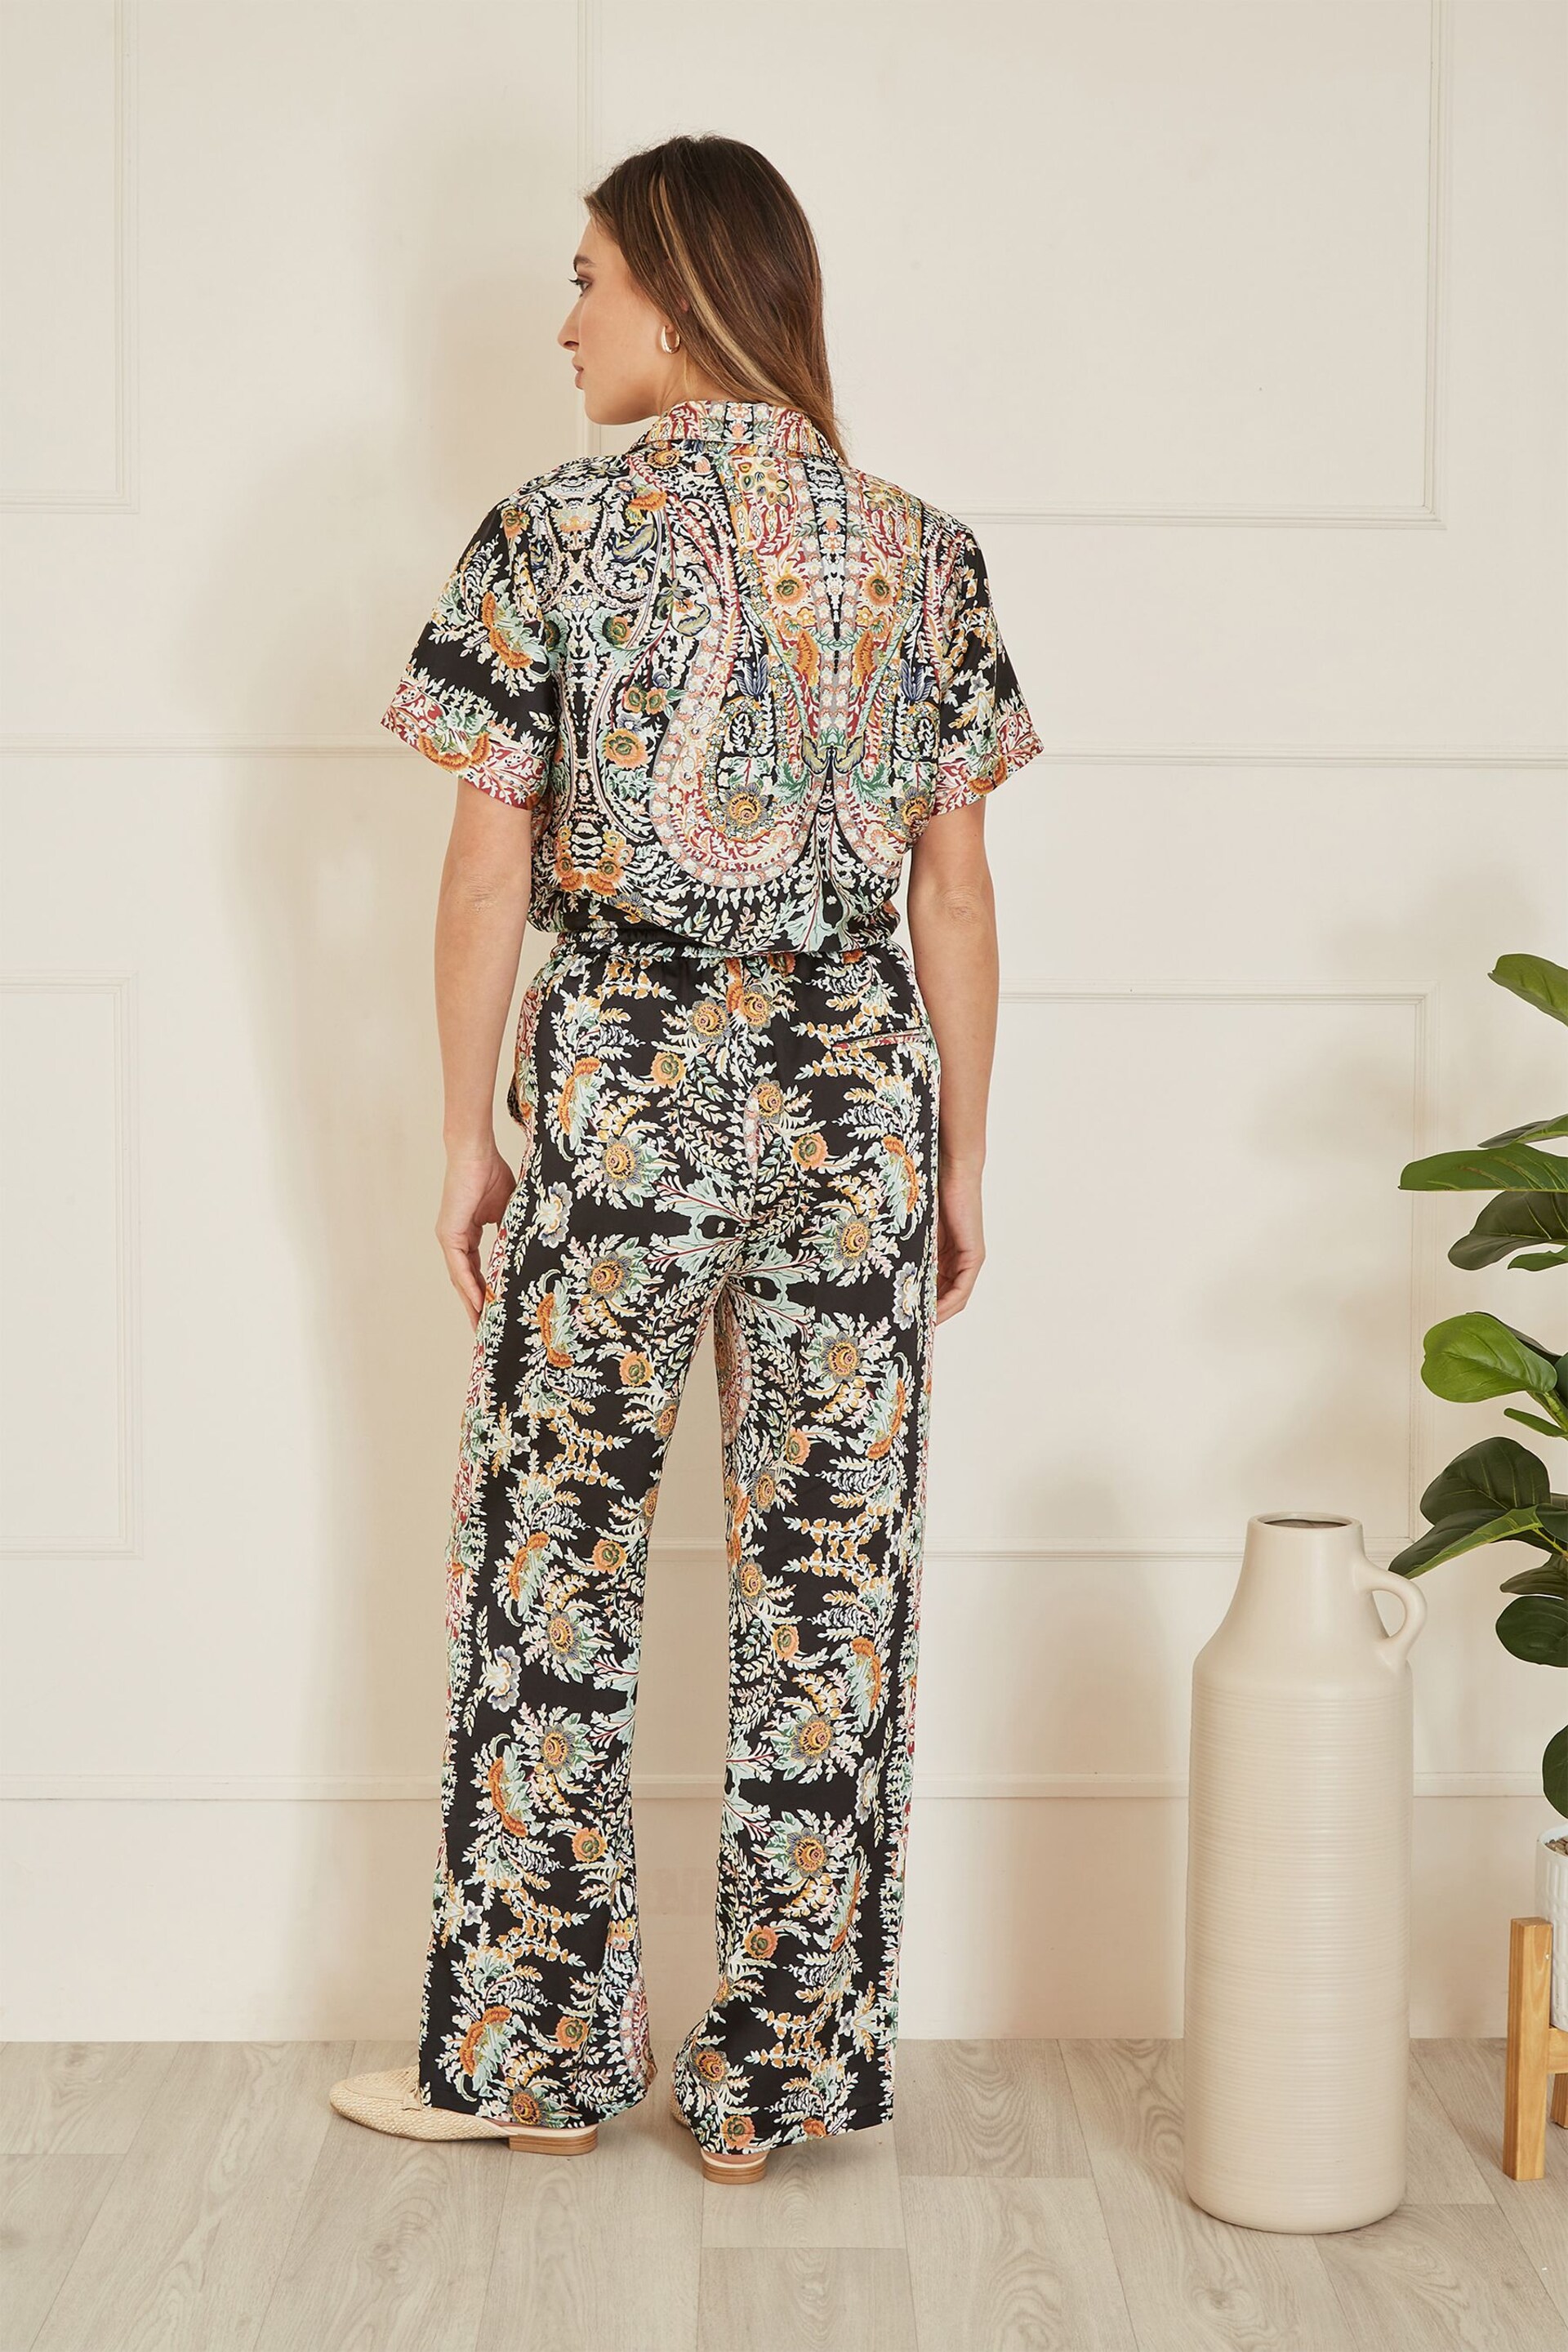 Yumi Black Relaxed Fit Paisley Print Trousers - Image 3 of 4